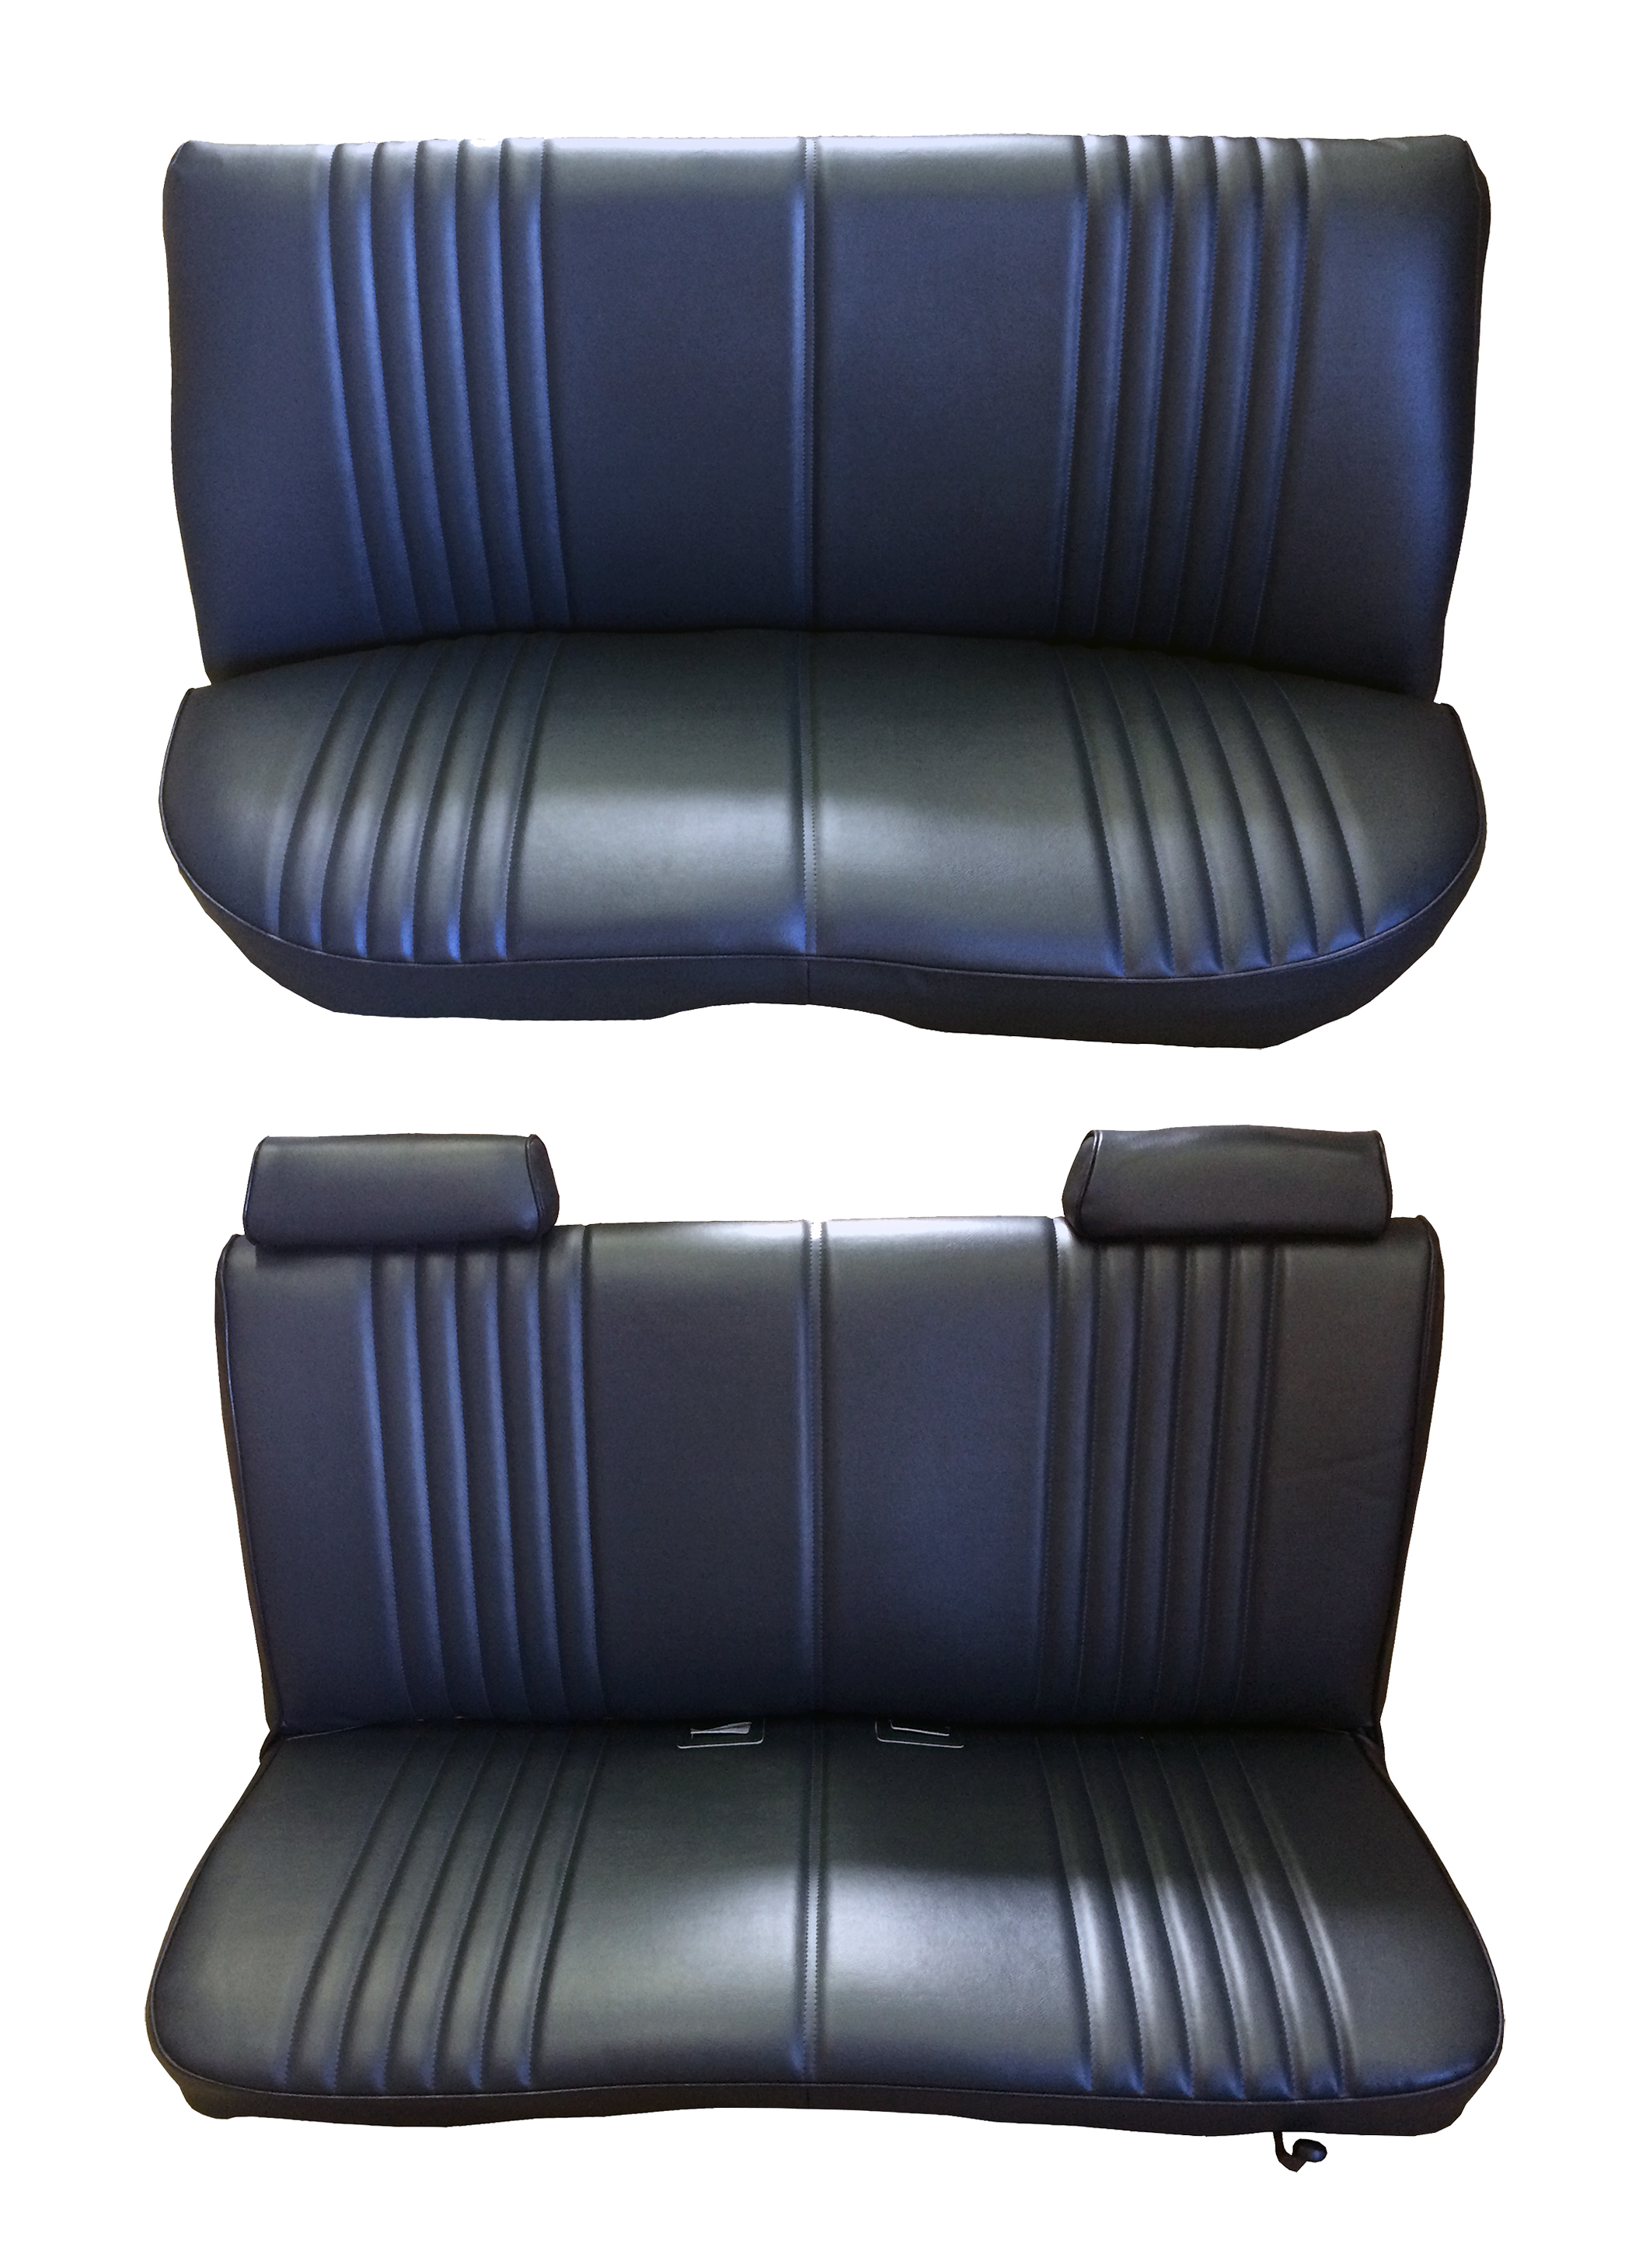 78-83 Malibu 4 Door Front and Rear Seat Covers with Head Rest Covers